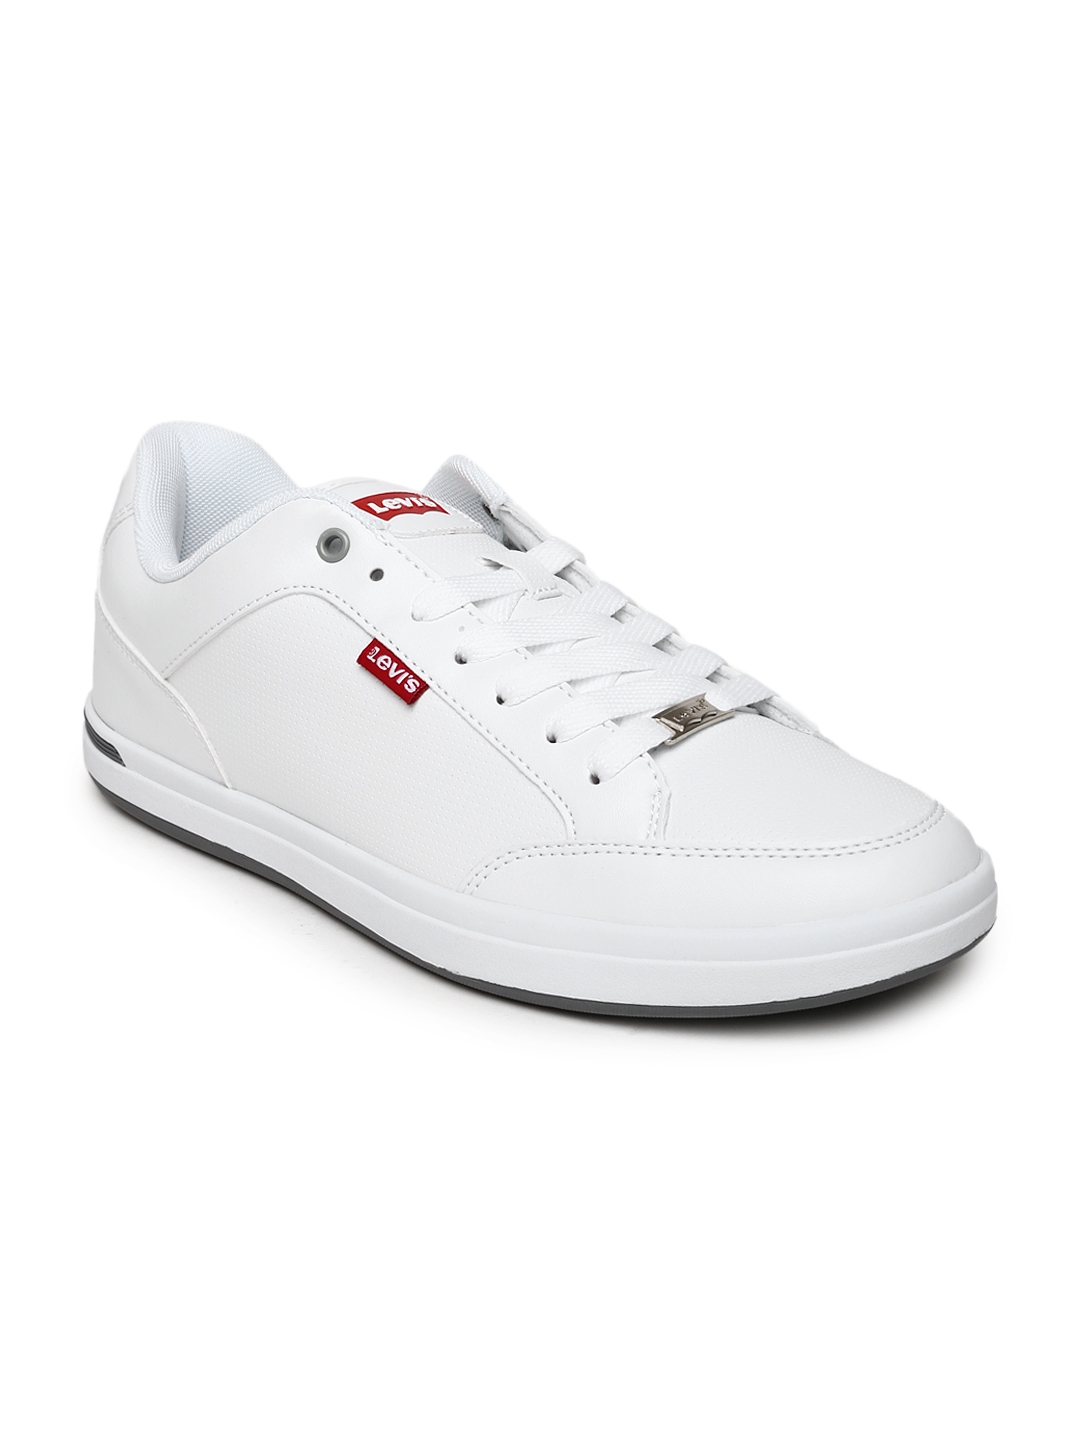 Buy Levis Men White Perforated Regular Sneakers - Casual Shoes for Men  1512613 | Myntra